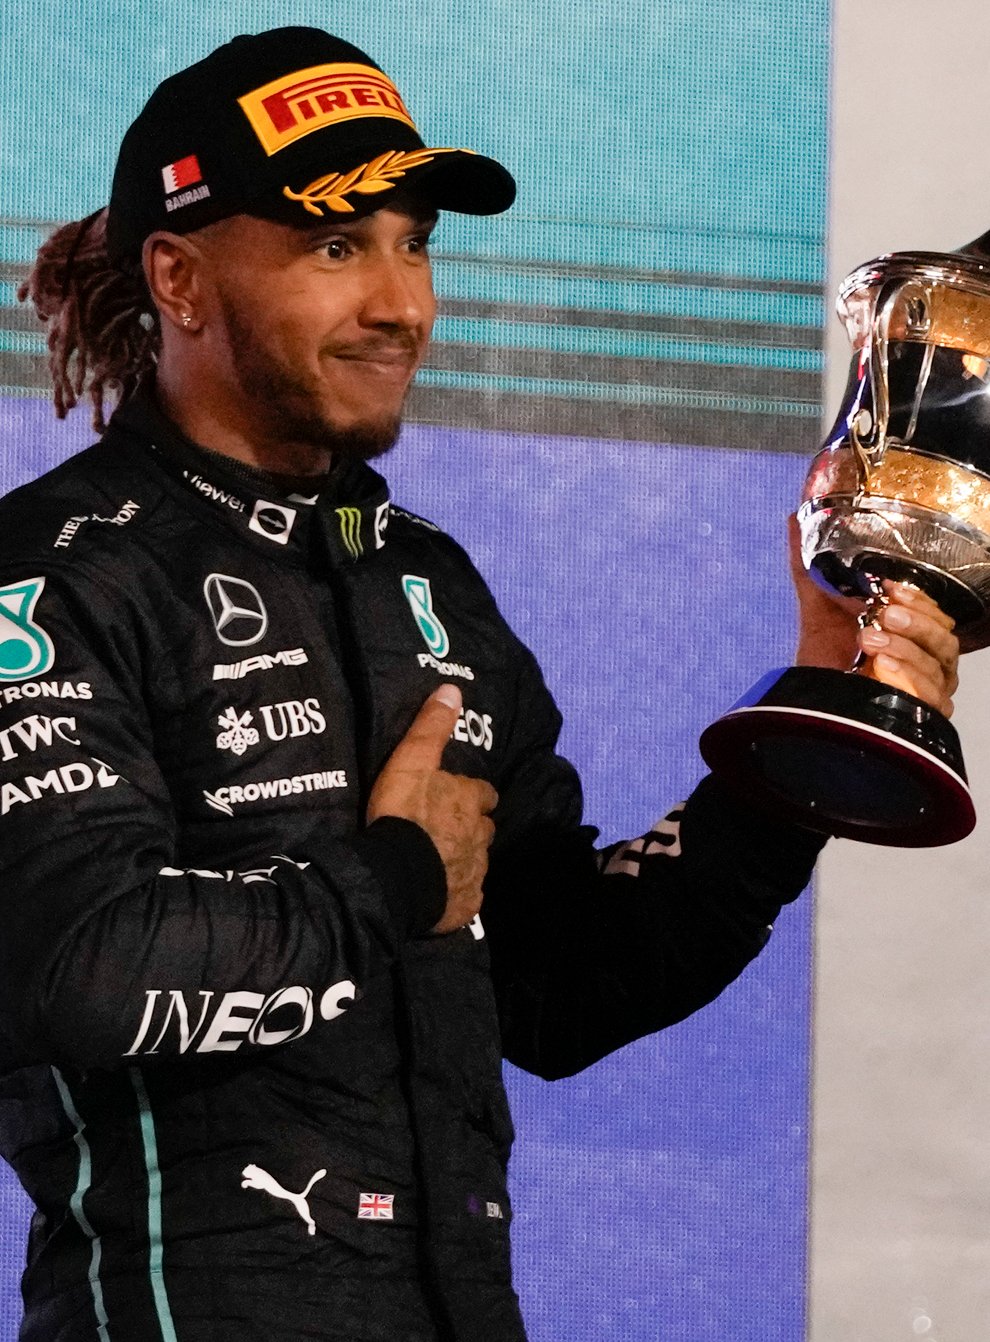 Lewis Hamilton was delighted with third place in Bahrain (Hassan Ammar/AP).